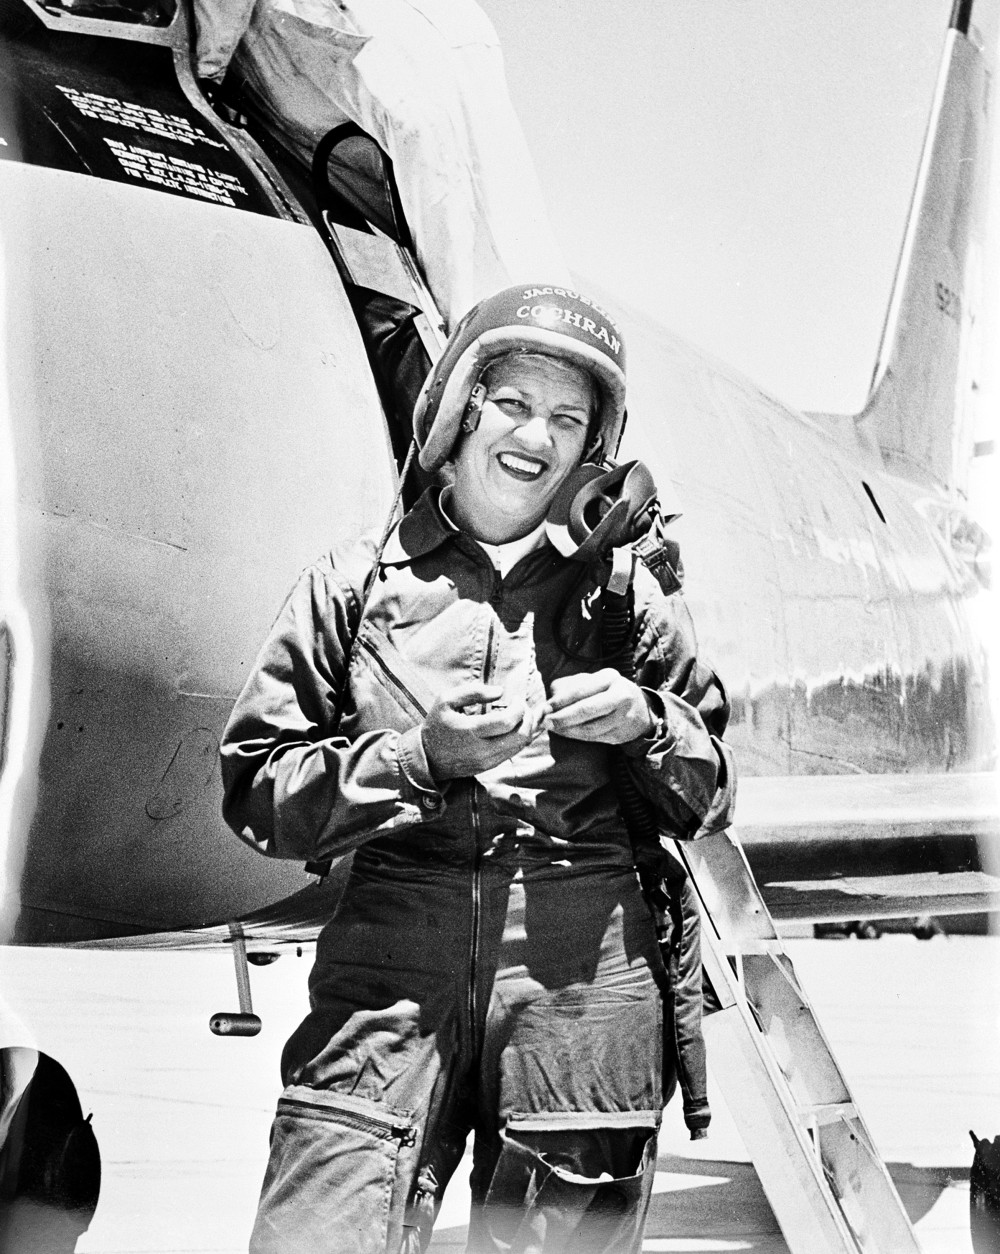 Jacqueline Cochran stands in front of the Canadian-built F-86 Sabre jet, in which she became the first woman to break the sound barrier, at Edwards Air Force Base, Ca., May 19, 1953. Cochran made history on May 18, flying at a speed of 625.5 miles per hour.  (AP Photo)